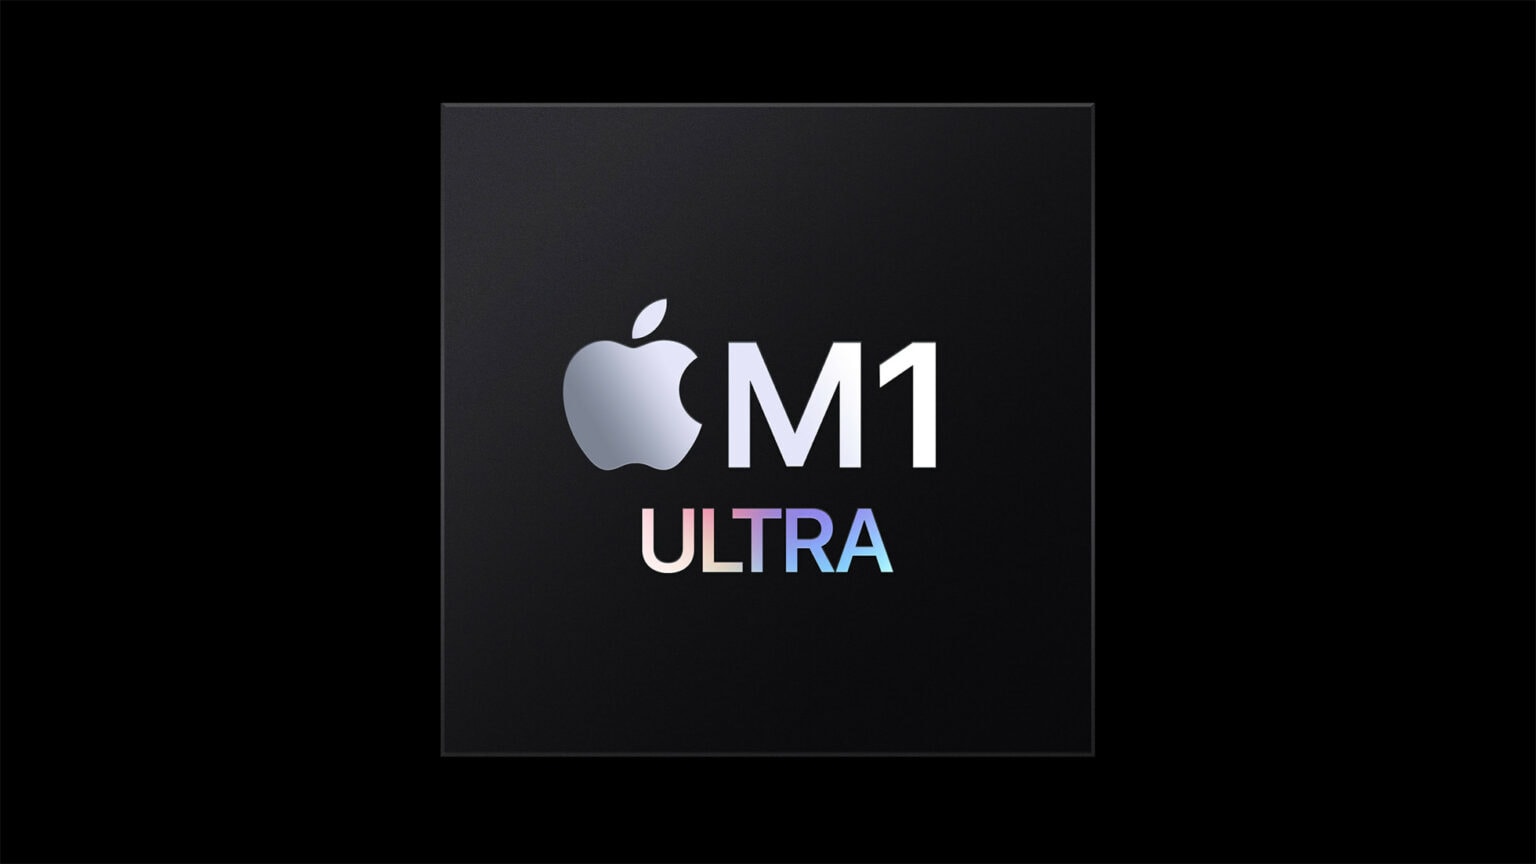 Apple's new M1 Ultra chip is the most powerful one ever in a personal computer.